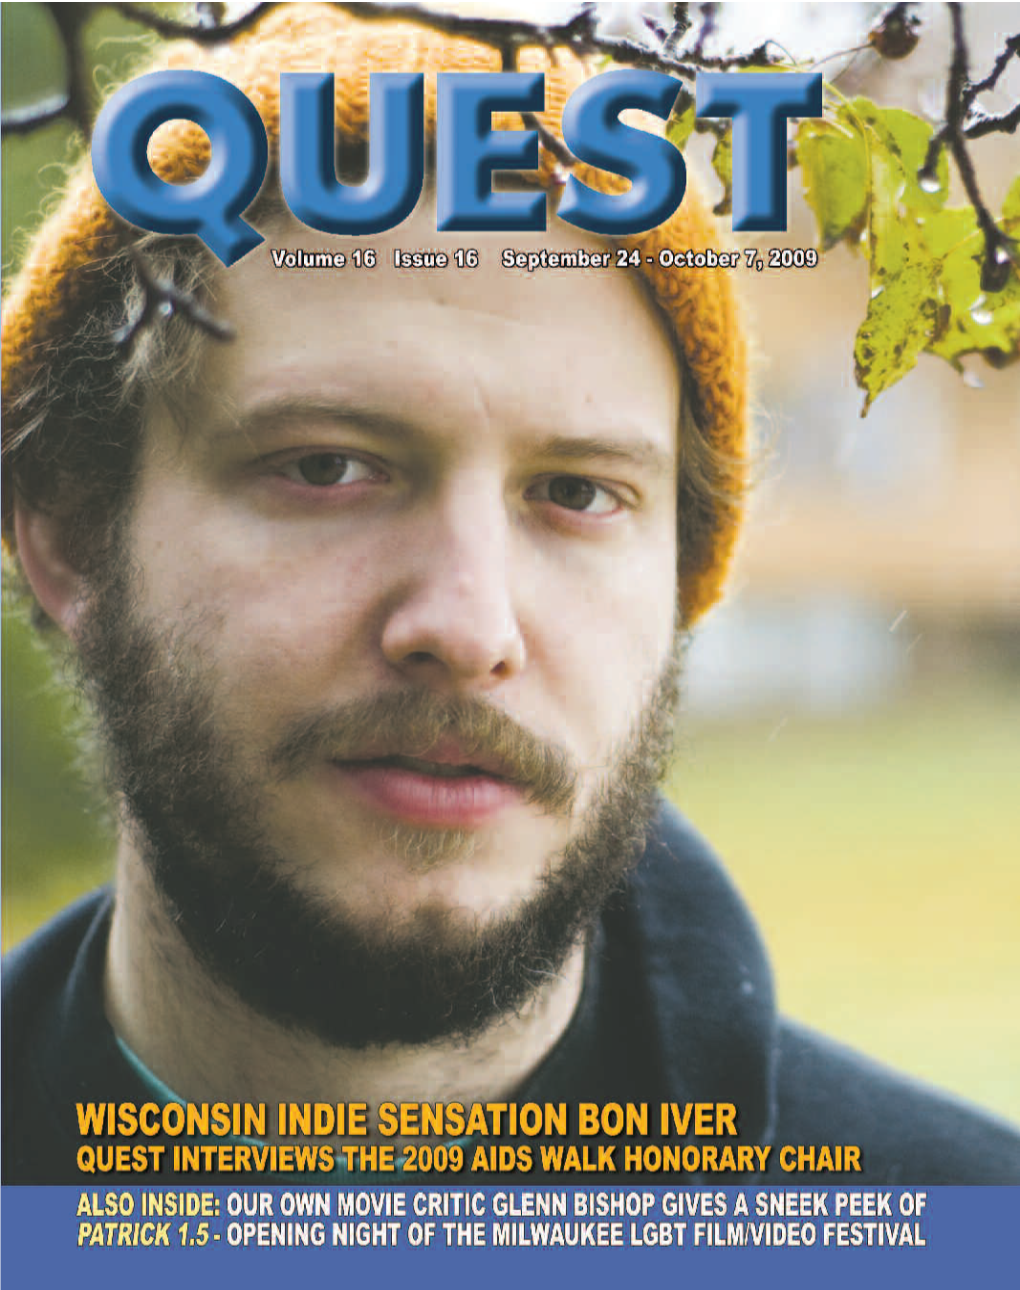 Quest Volume 16 Issue 16